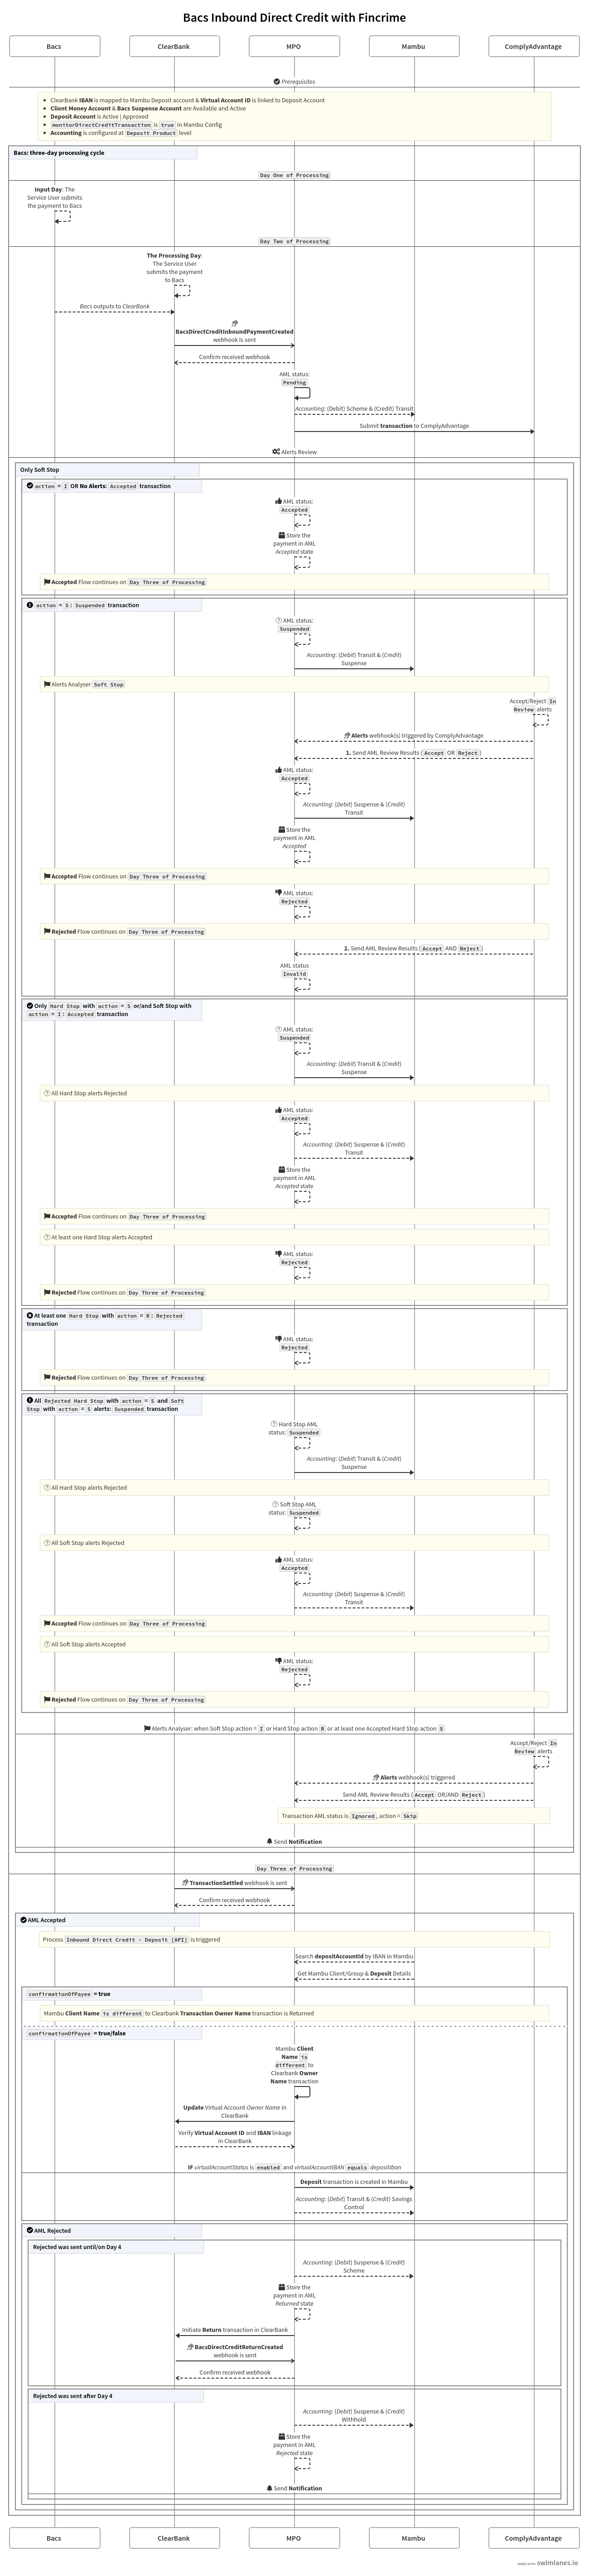 A sequence diagram showing the Inbound Direct Credit flow between Mambu, MPO, ClearBank, ComplyAdvantage, and Bacs